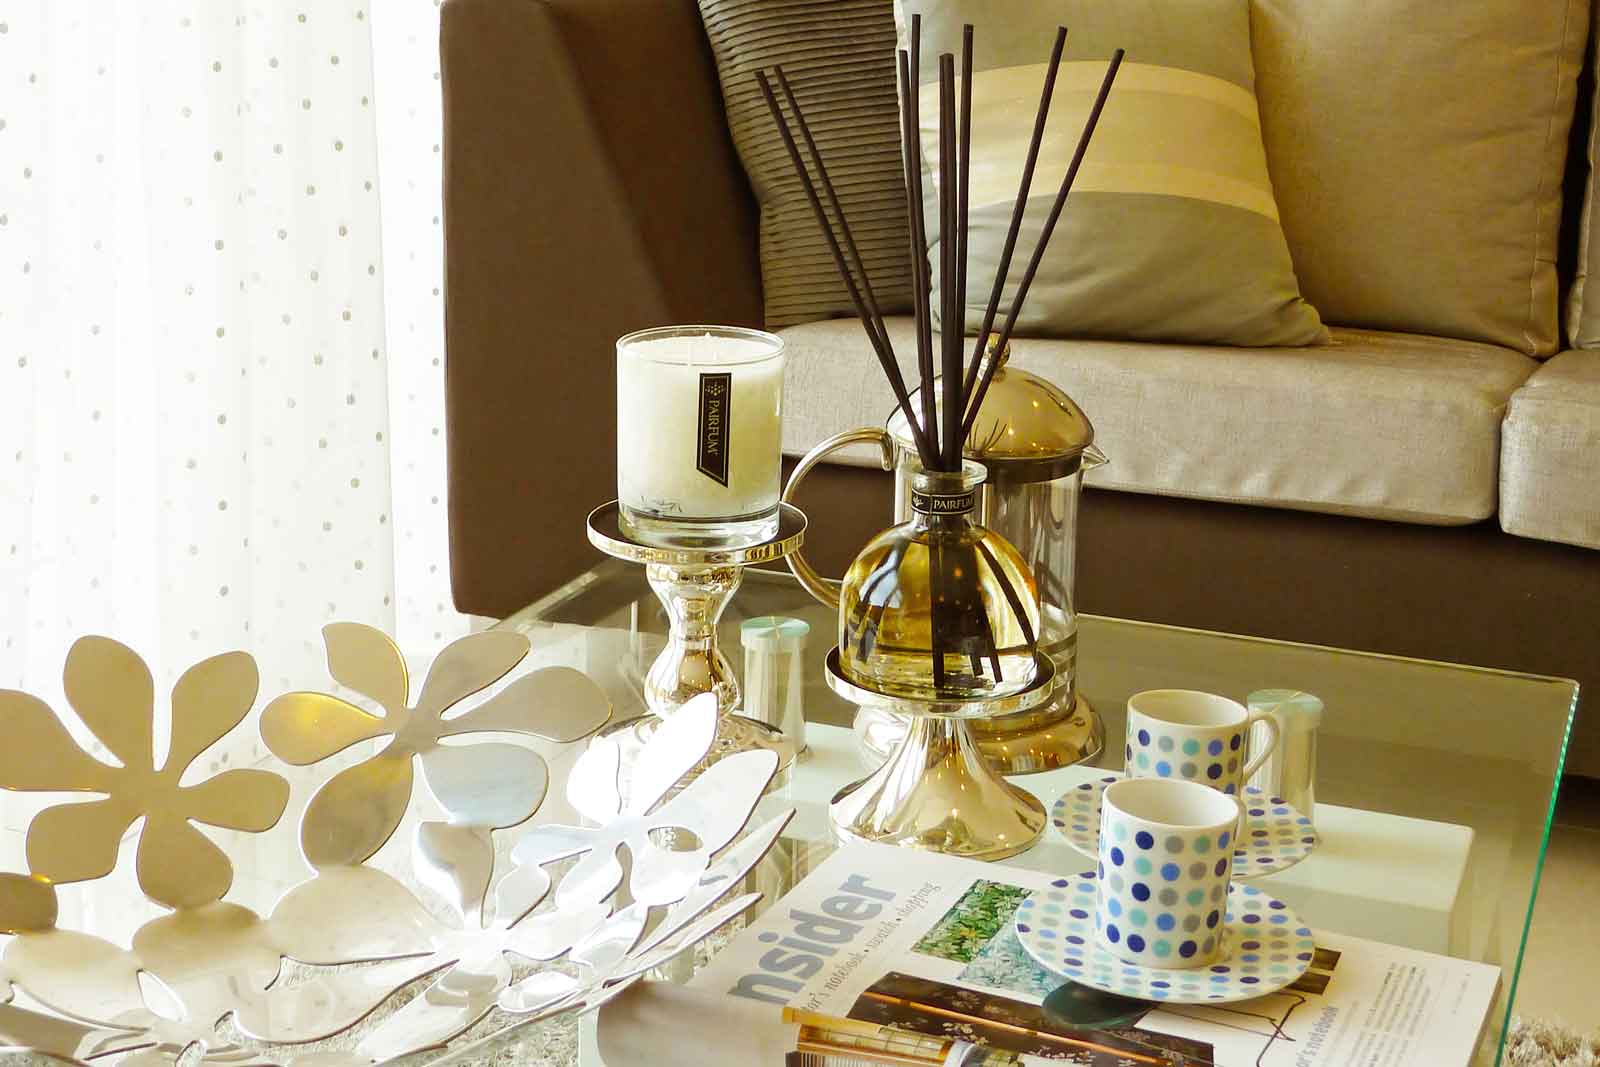 Best reed diffuser for large room